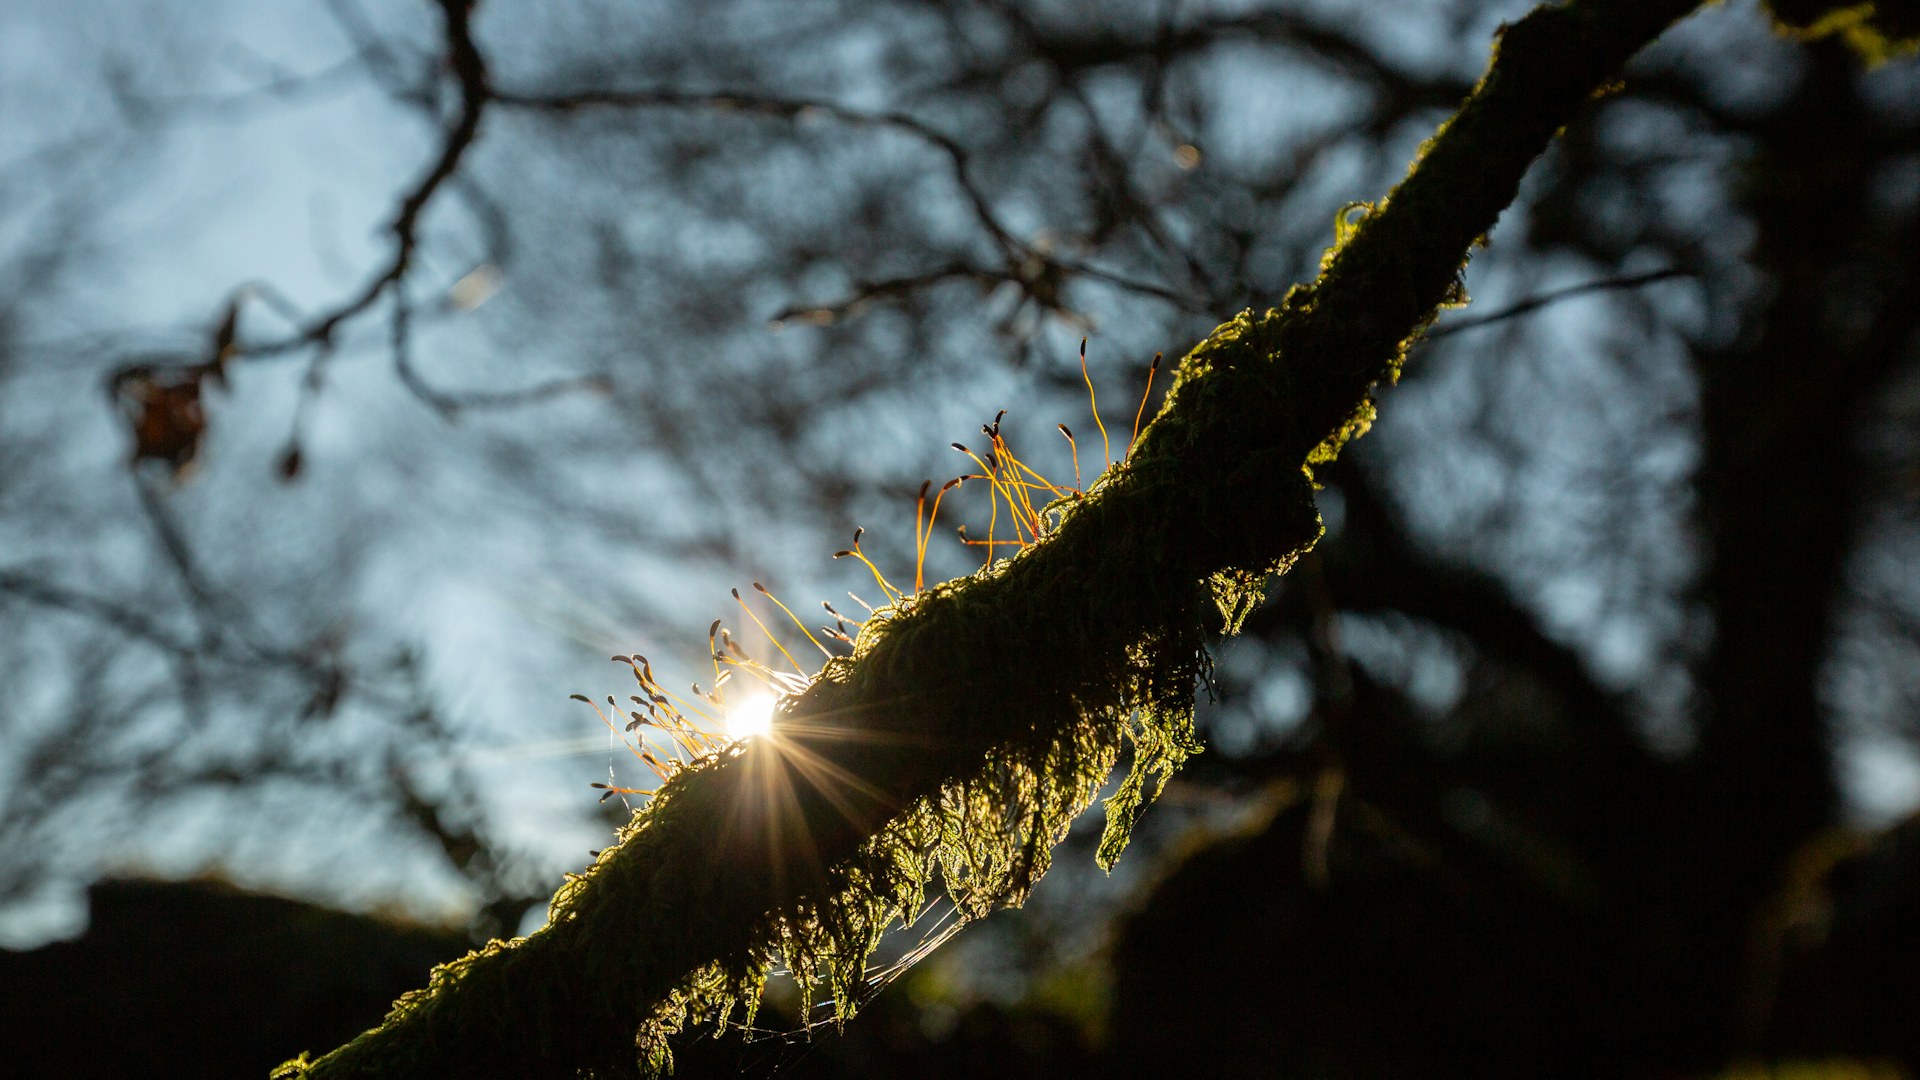 Sun over a mossy branch